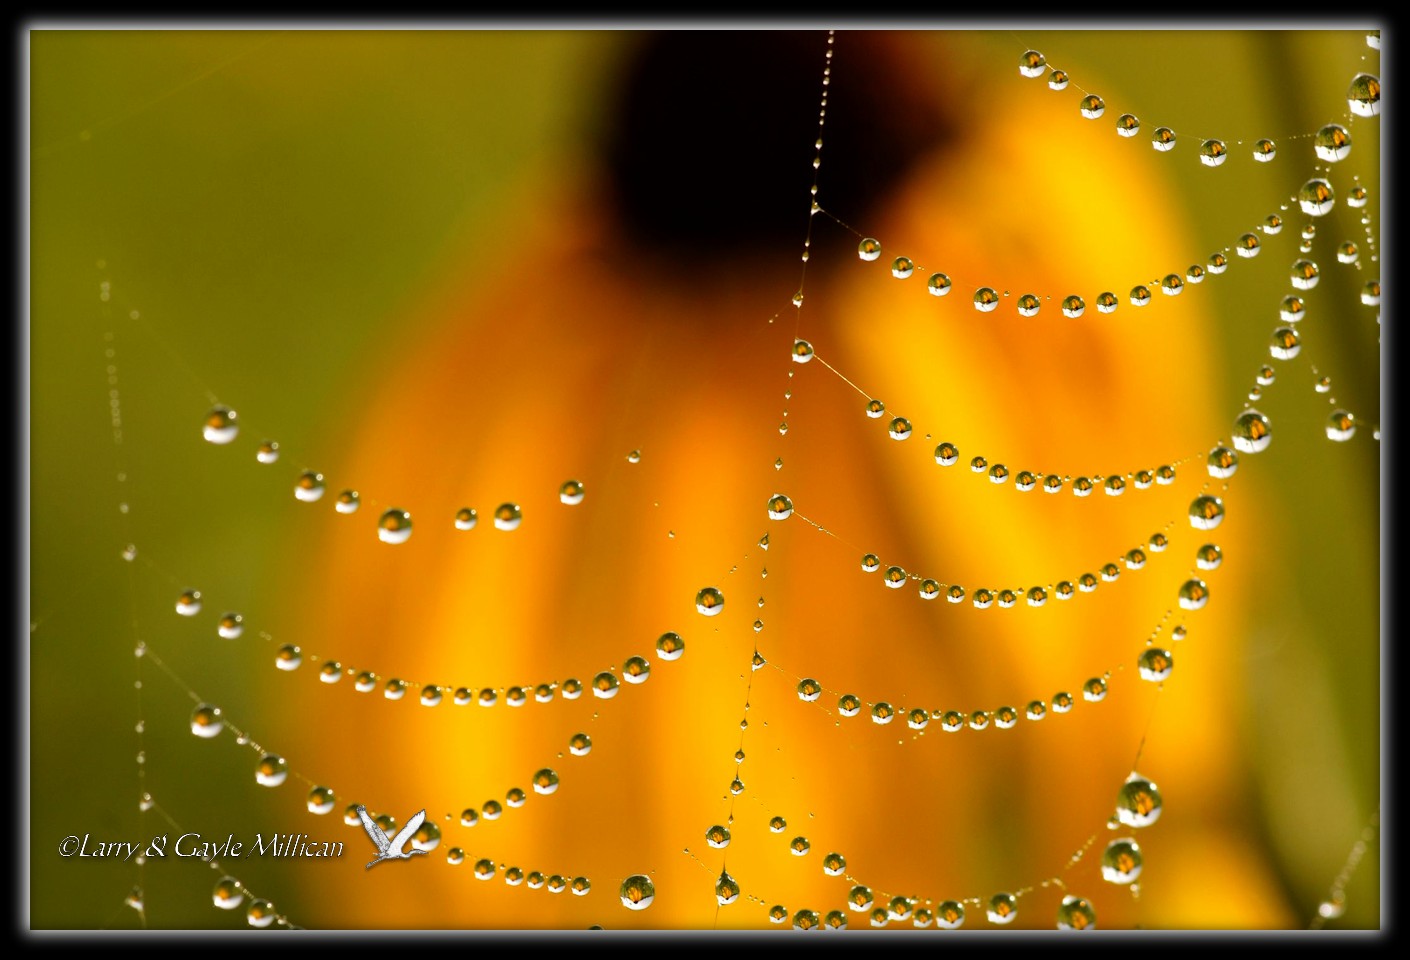 Dew drops on a spider web reflect the black eyed susan flower in the background.